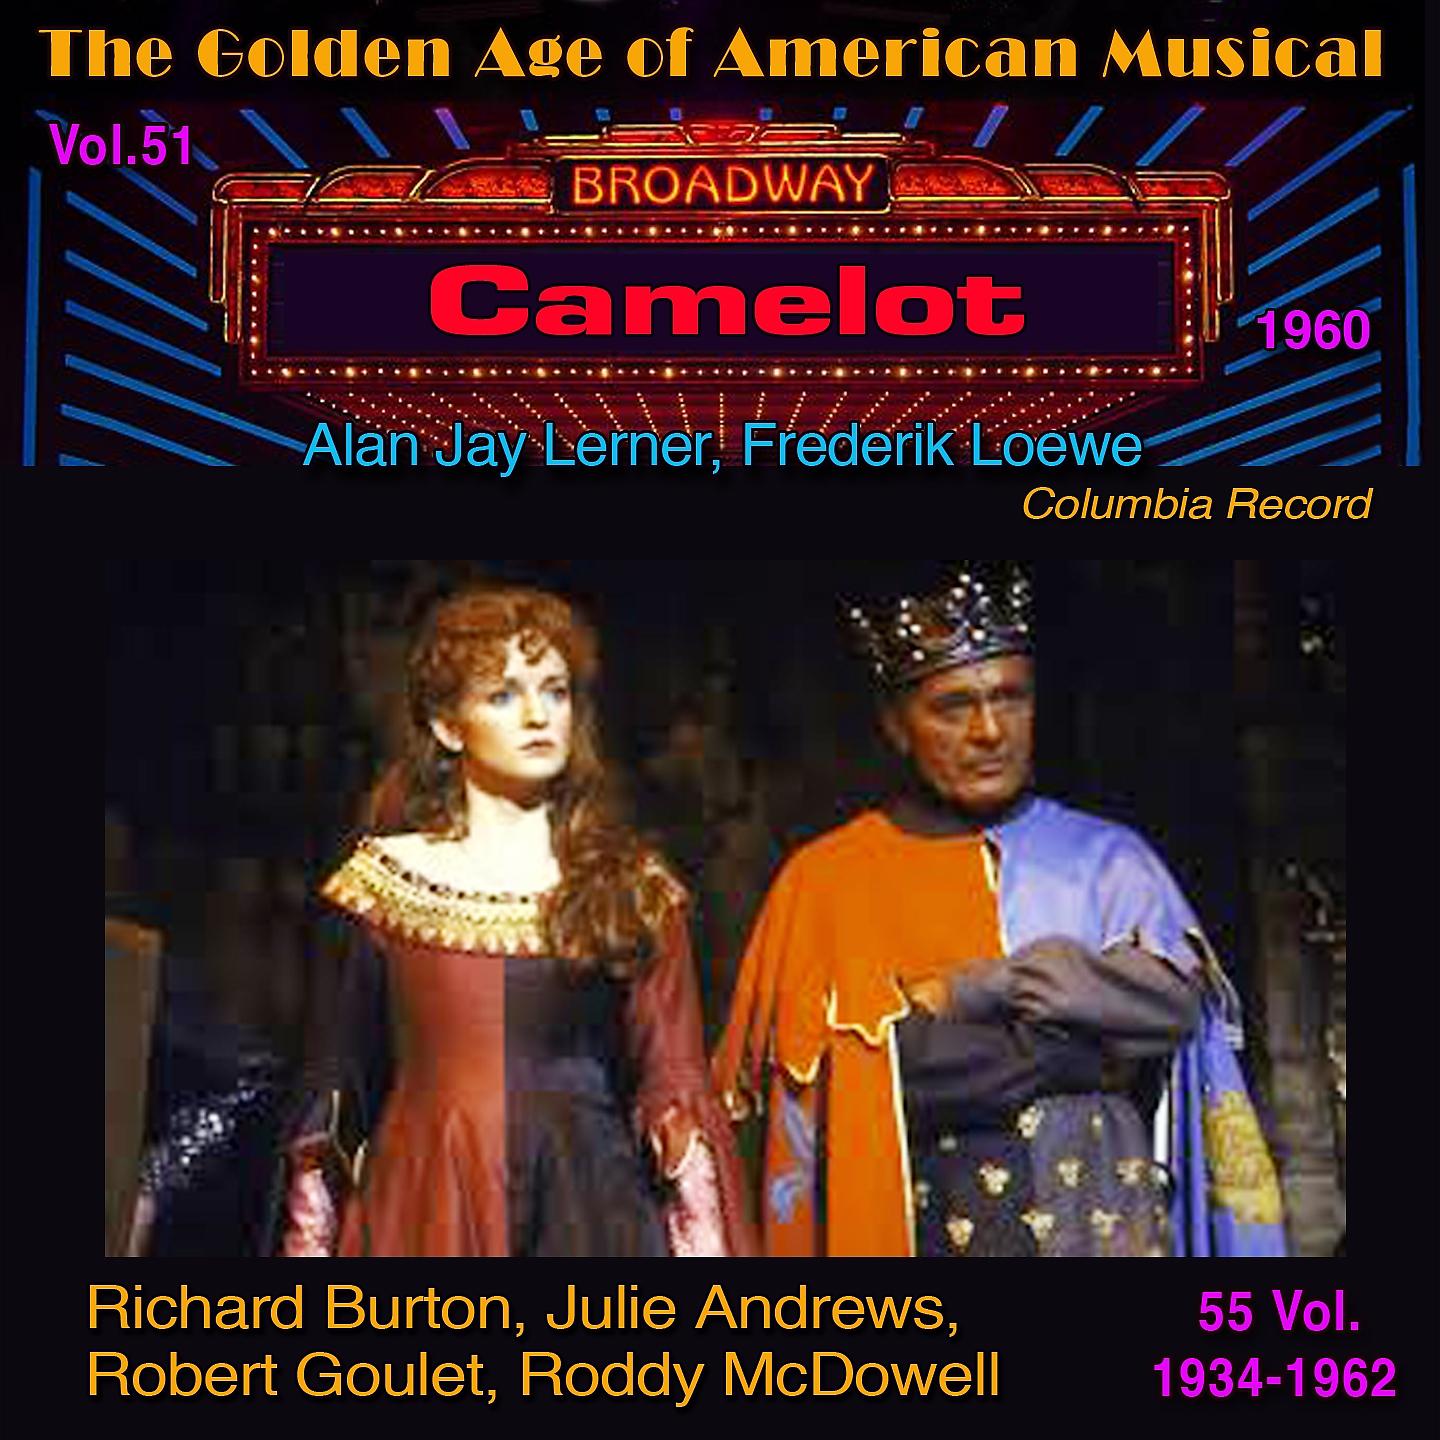 Постер альбома The Golden Age of American Musical (1934-1962) in 55 Vol. Camelot - Vol 51/55